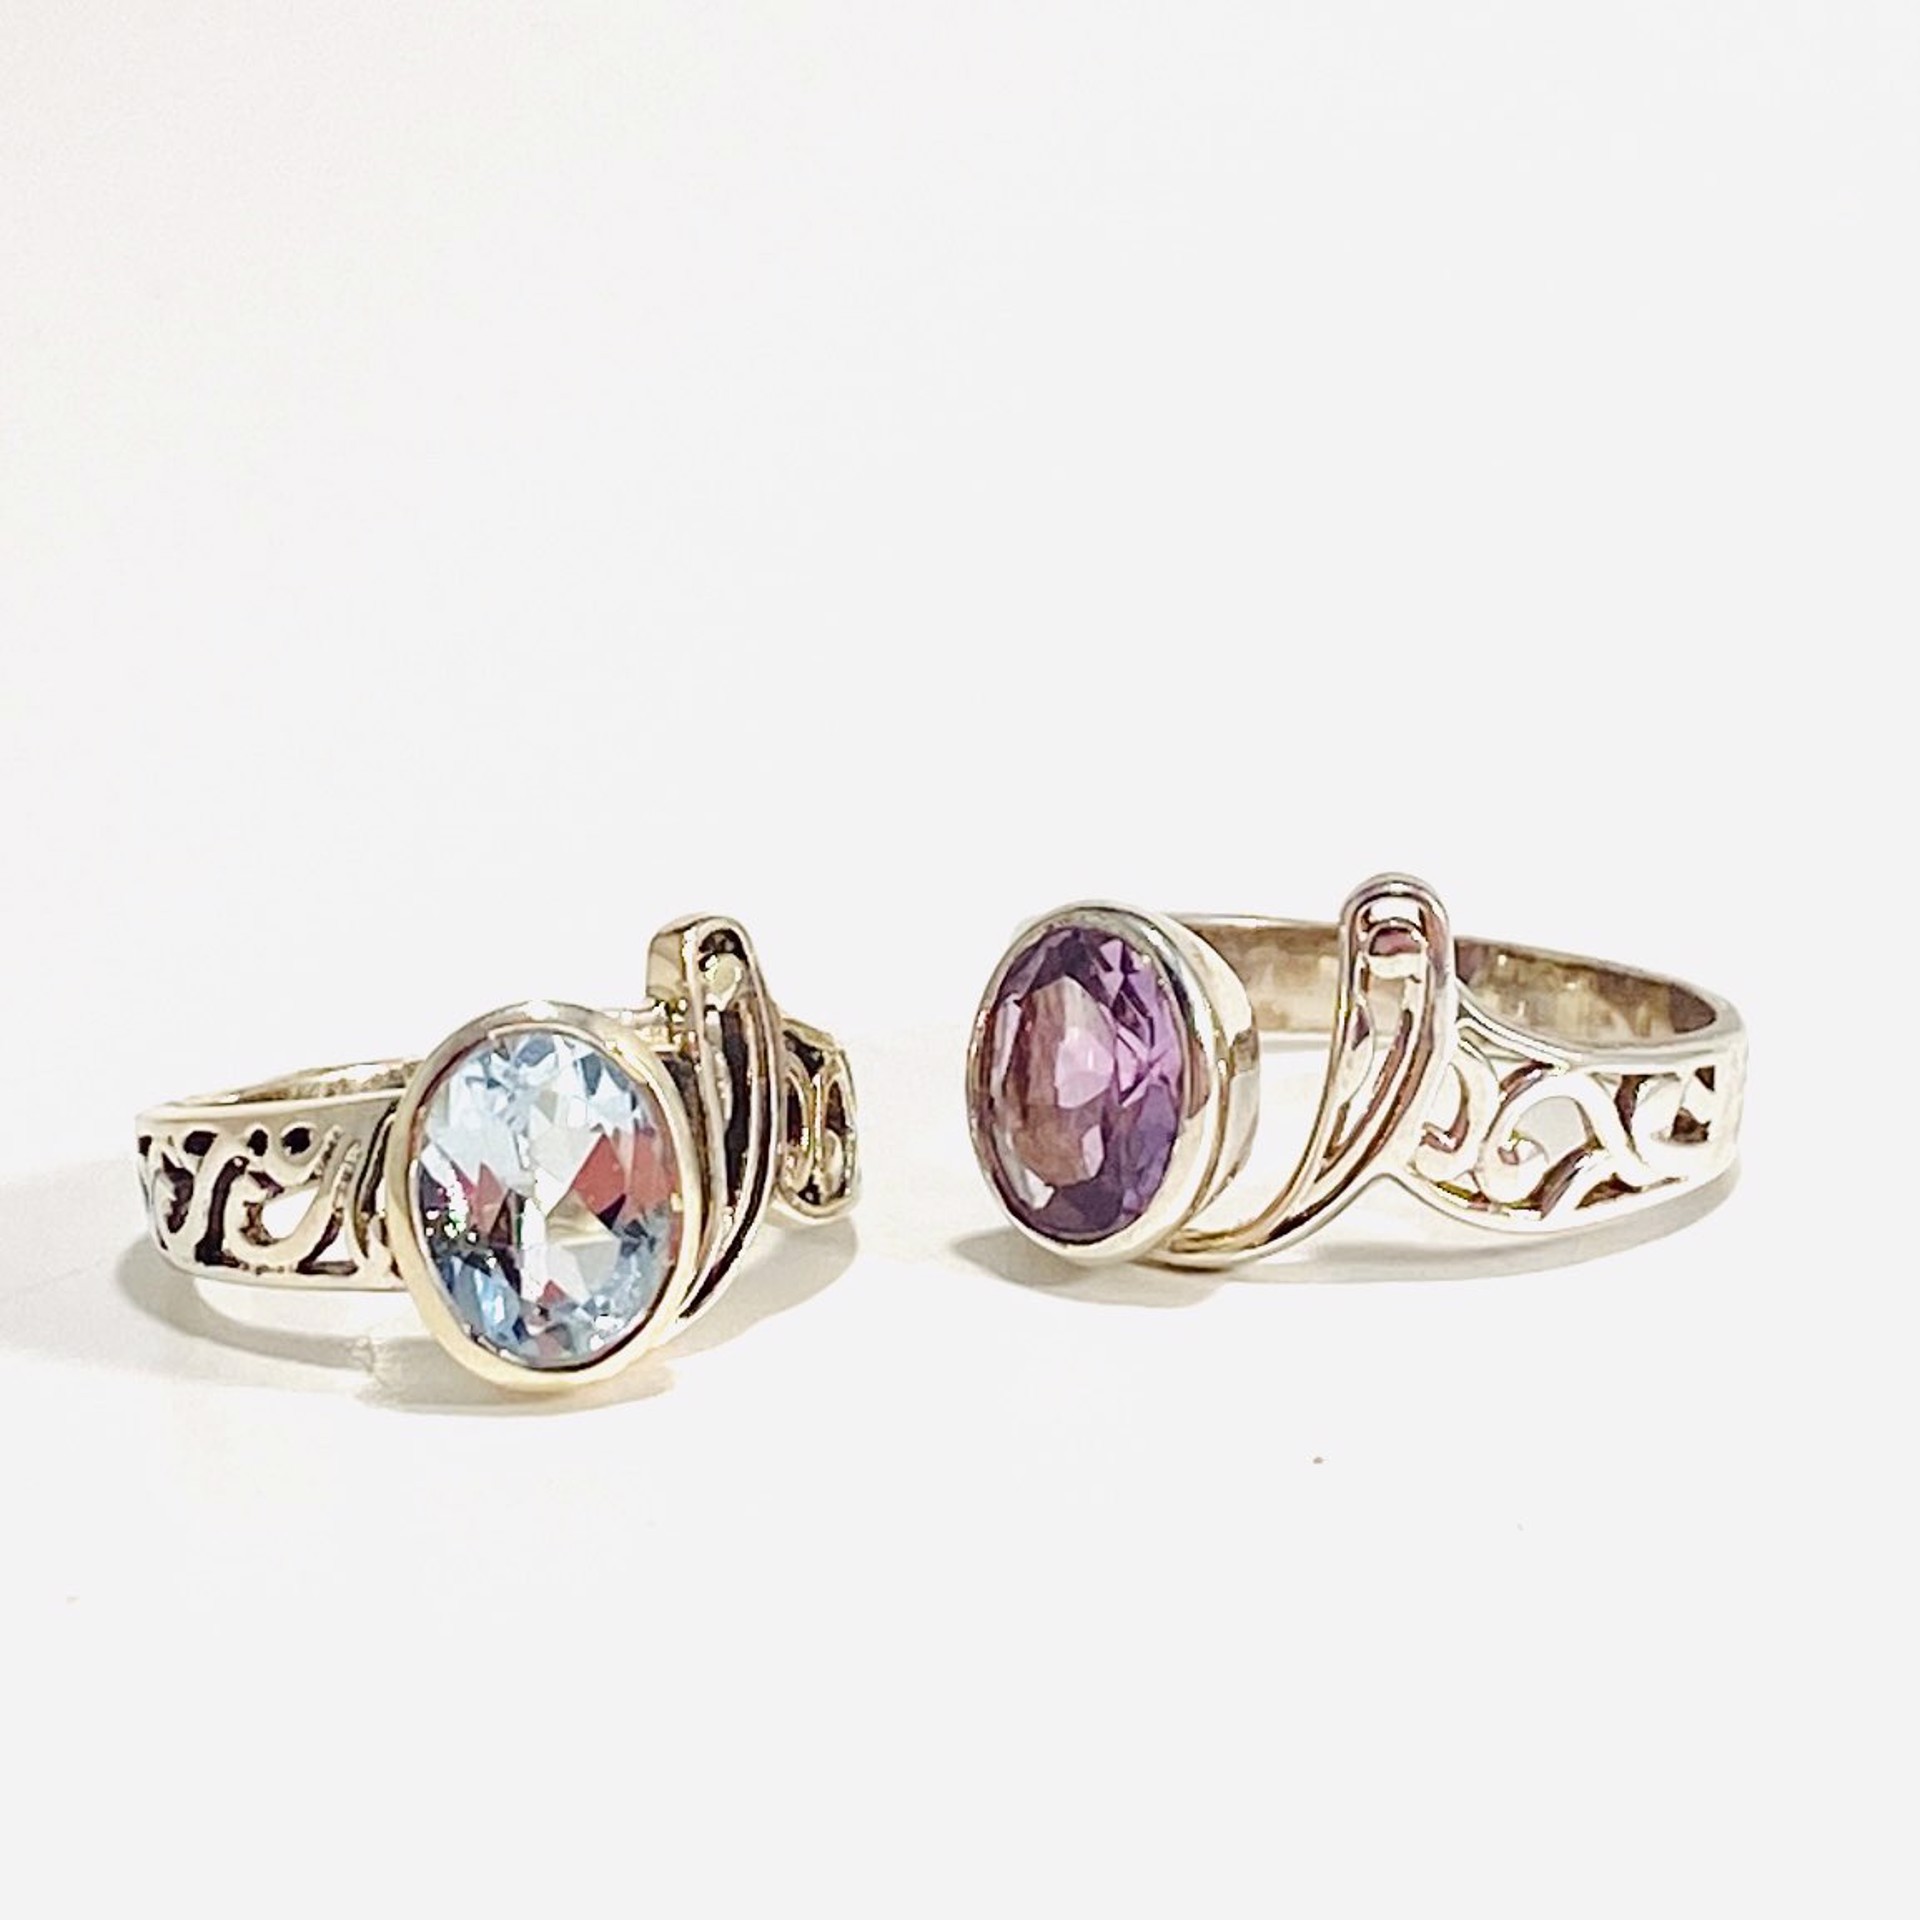 Blue Topaz or Amethyst Ring LIMITED SIZES MONDR-2035 by Monica Mehta